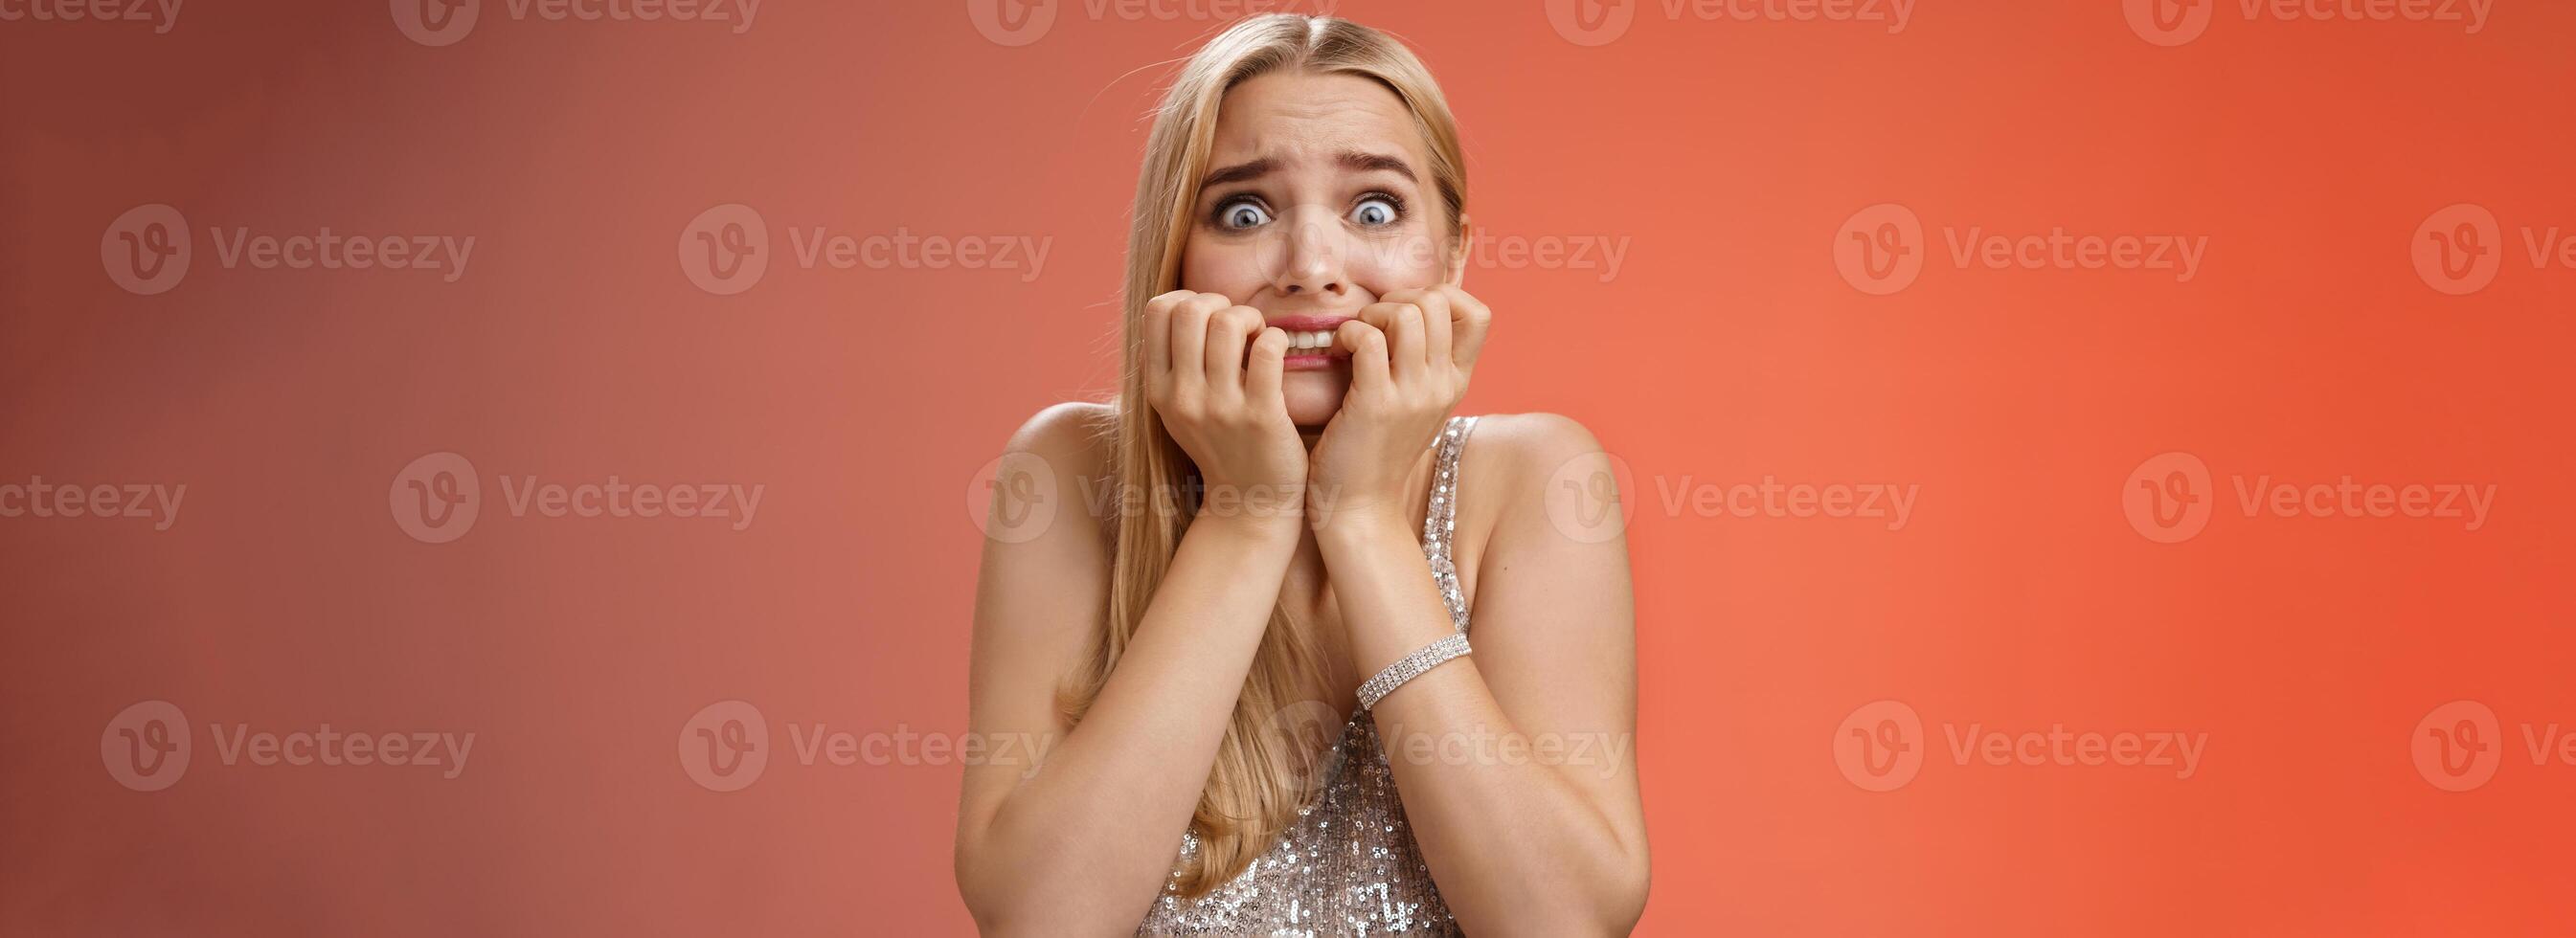 Frightened afraid panicking young cute blond woman biting nails pop eyes scared camera look terrified stunned speechless stare forward standing red background gasping trembling fear photo